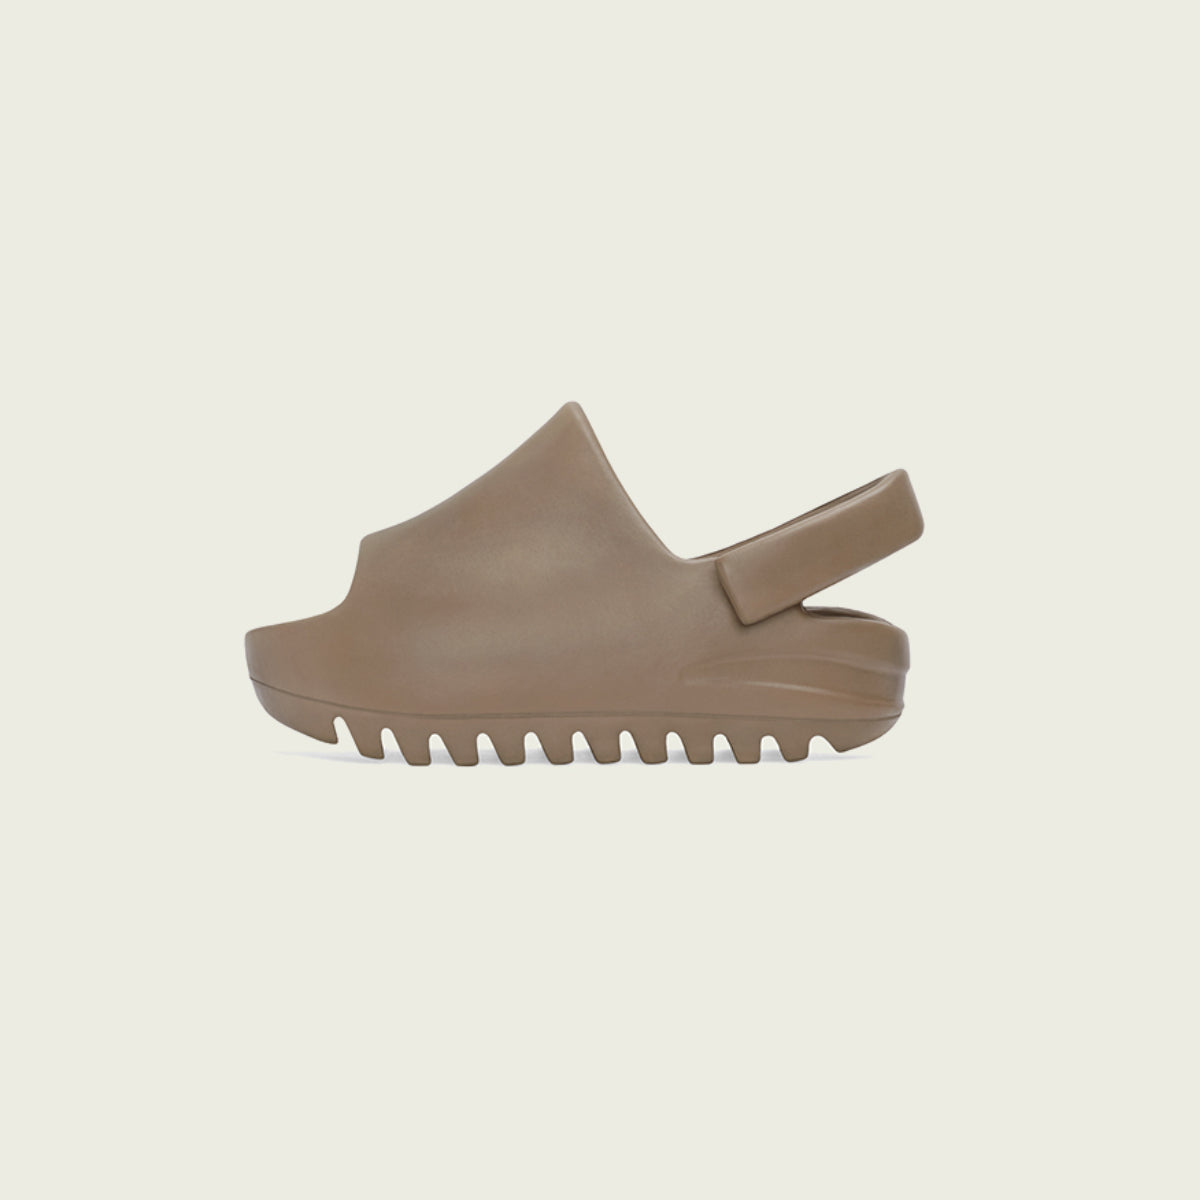 The whole family will be together as the toe caps the new YEEZY Slide Infant baby shoes are officially unveiled.